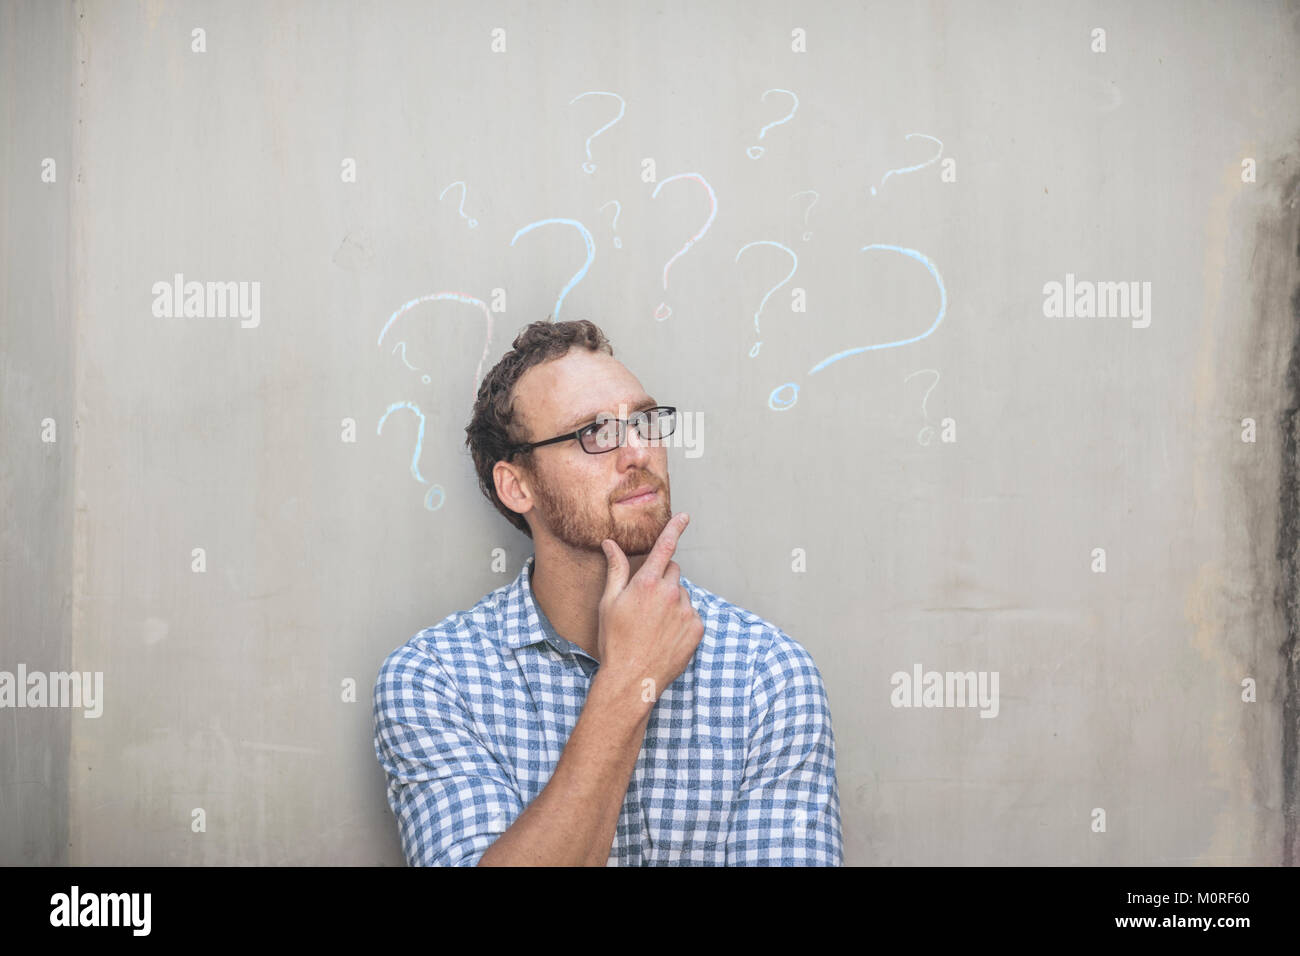 Man standing next to a concrete wall with chalk question mark drawings Stock Photo